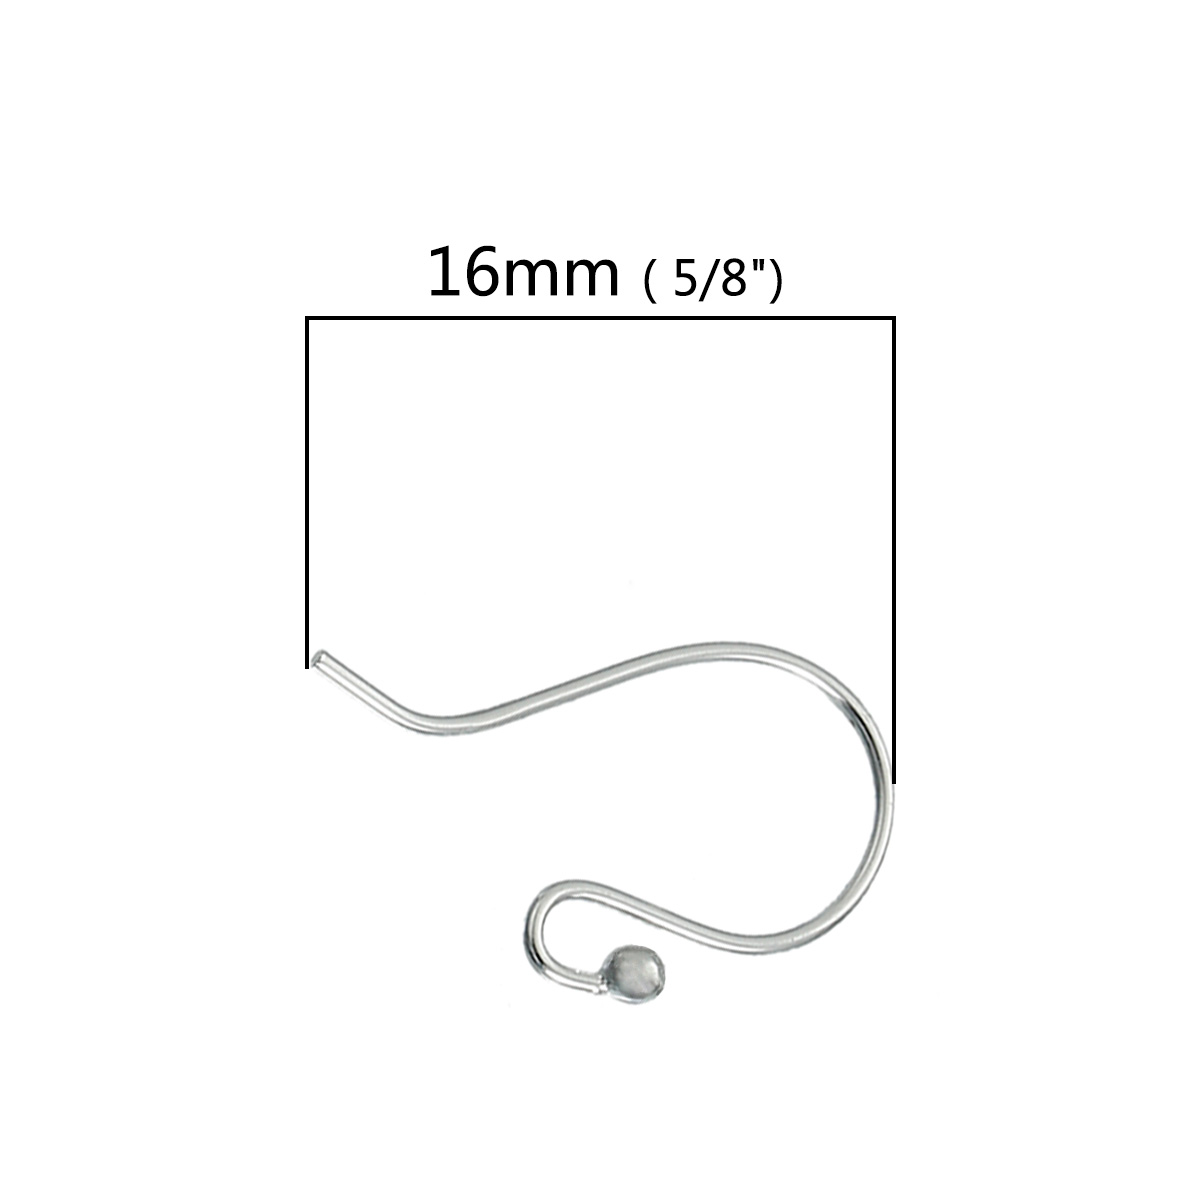 Picture of Sterling Silver Ear Wire Hooks Earring Findings Silver 16mm( 5/8") x 8mm( 3/8"), 1 Pair